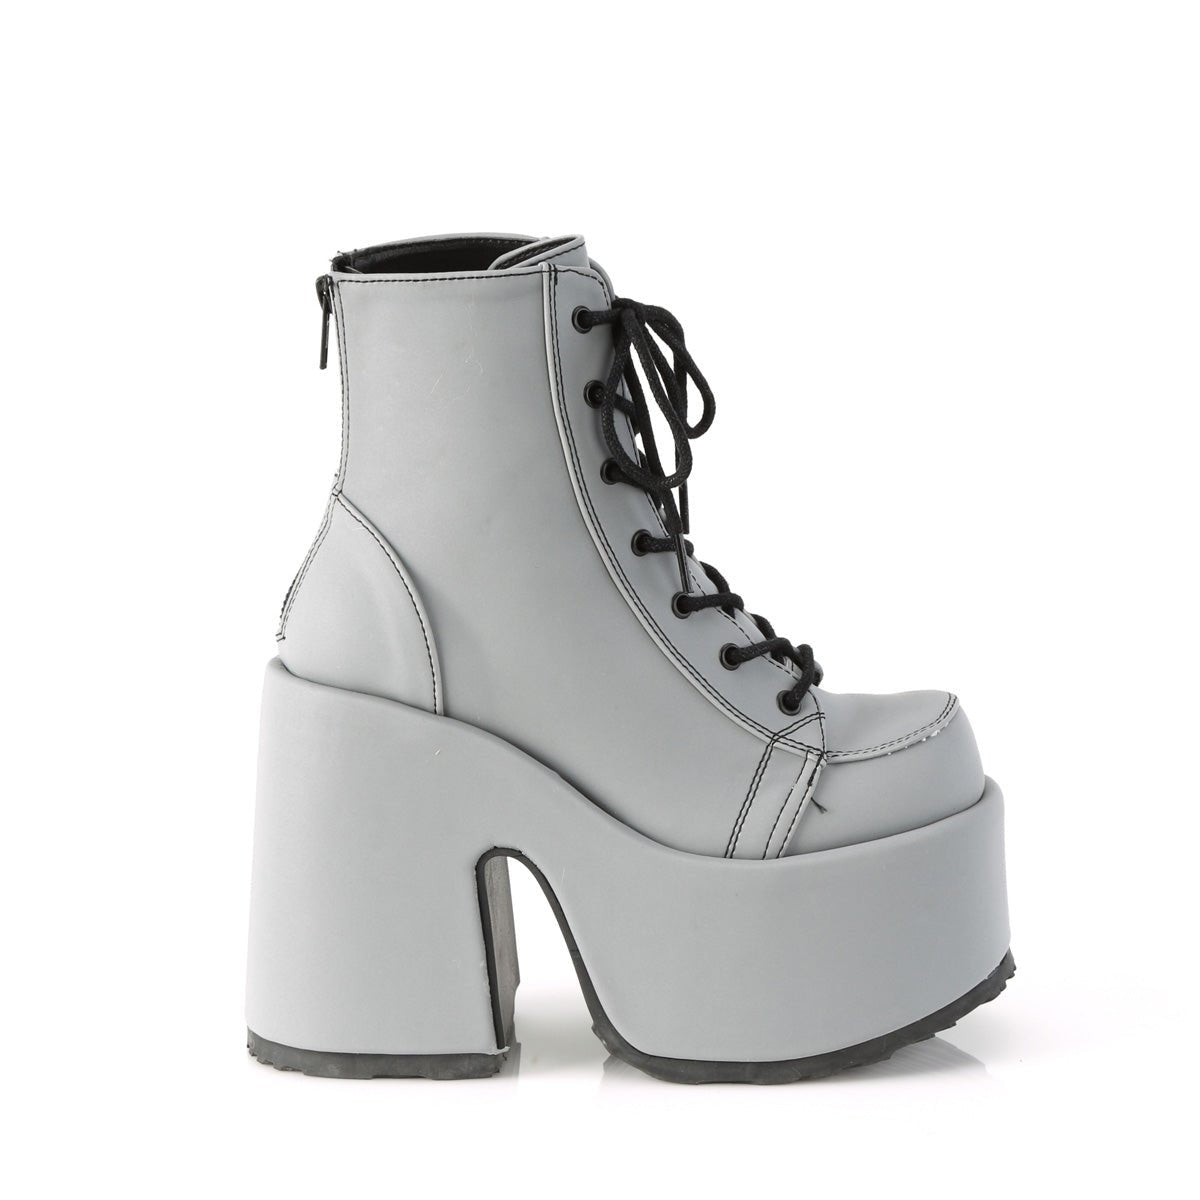 Too Fast | Demonia Camel 203 | Grey Reflective Vegan Leather Women's Ankle Boots